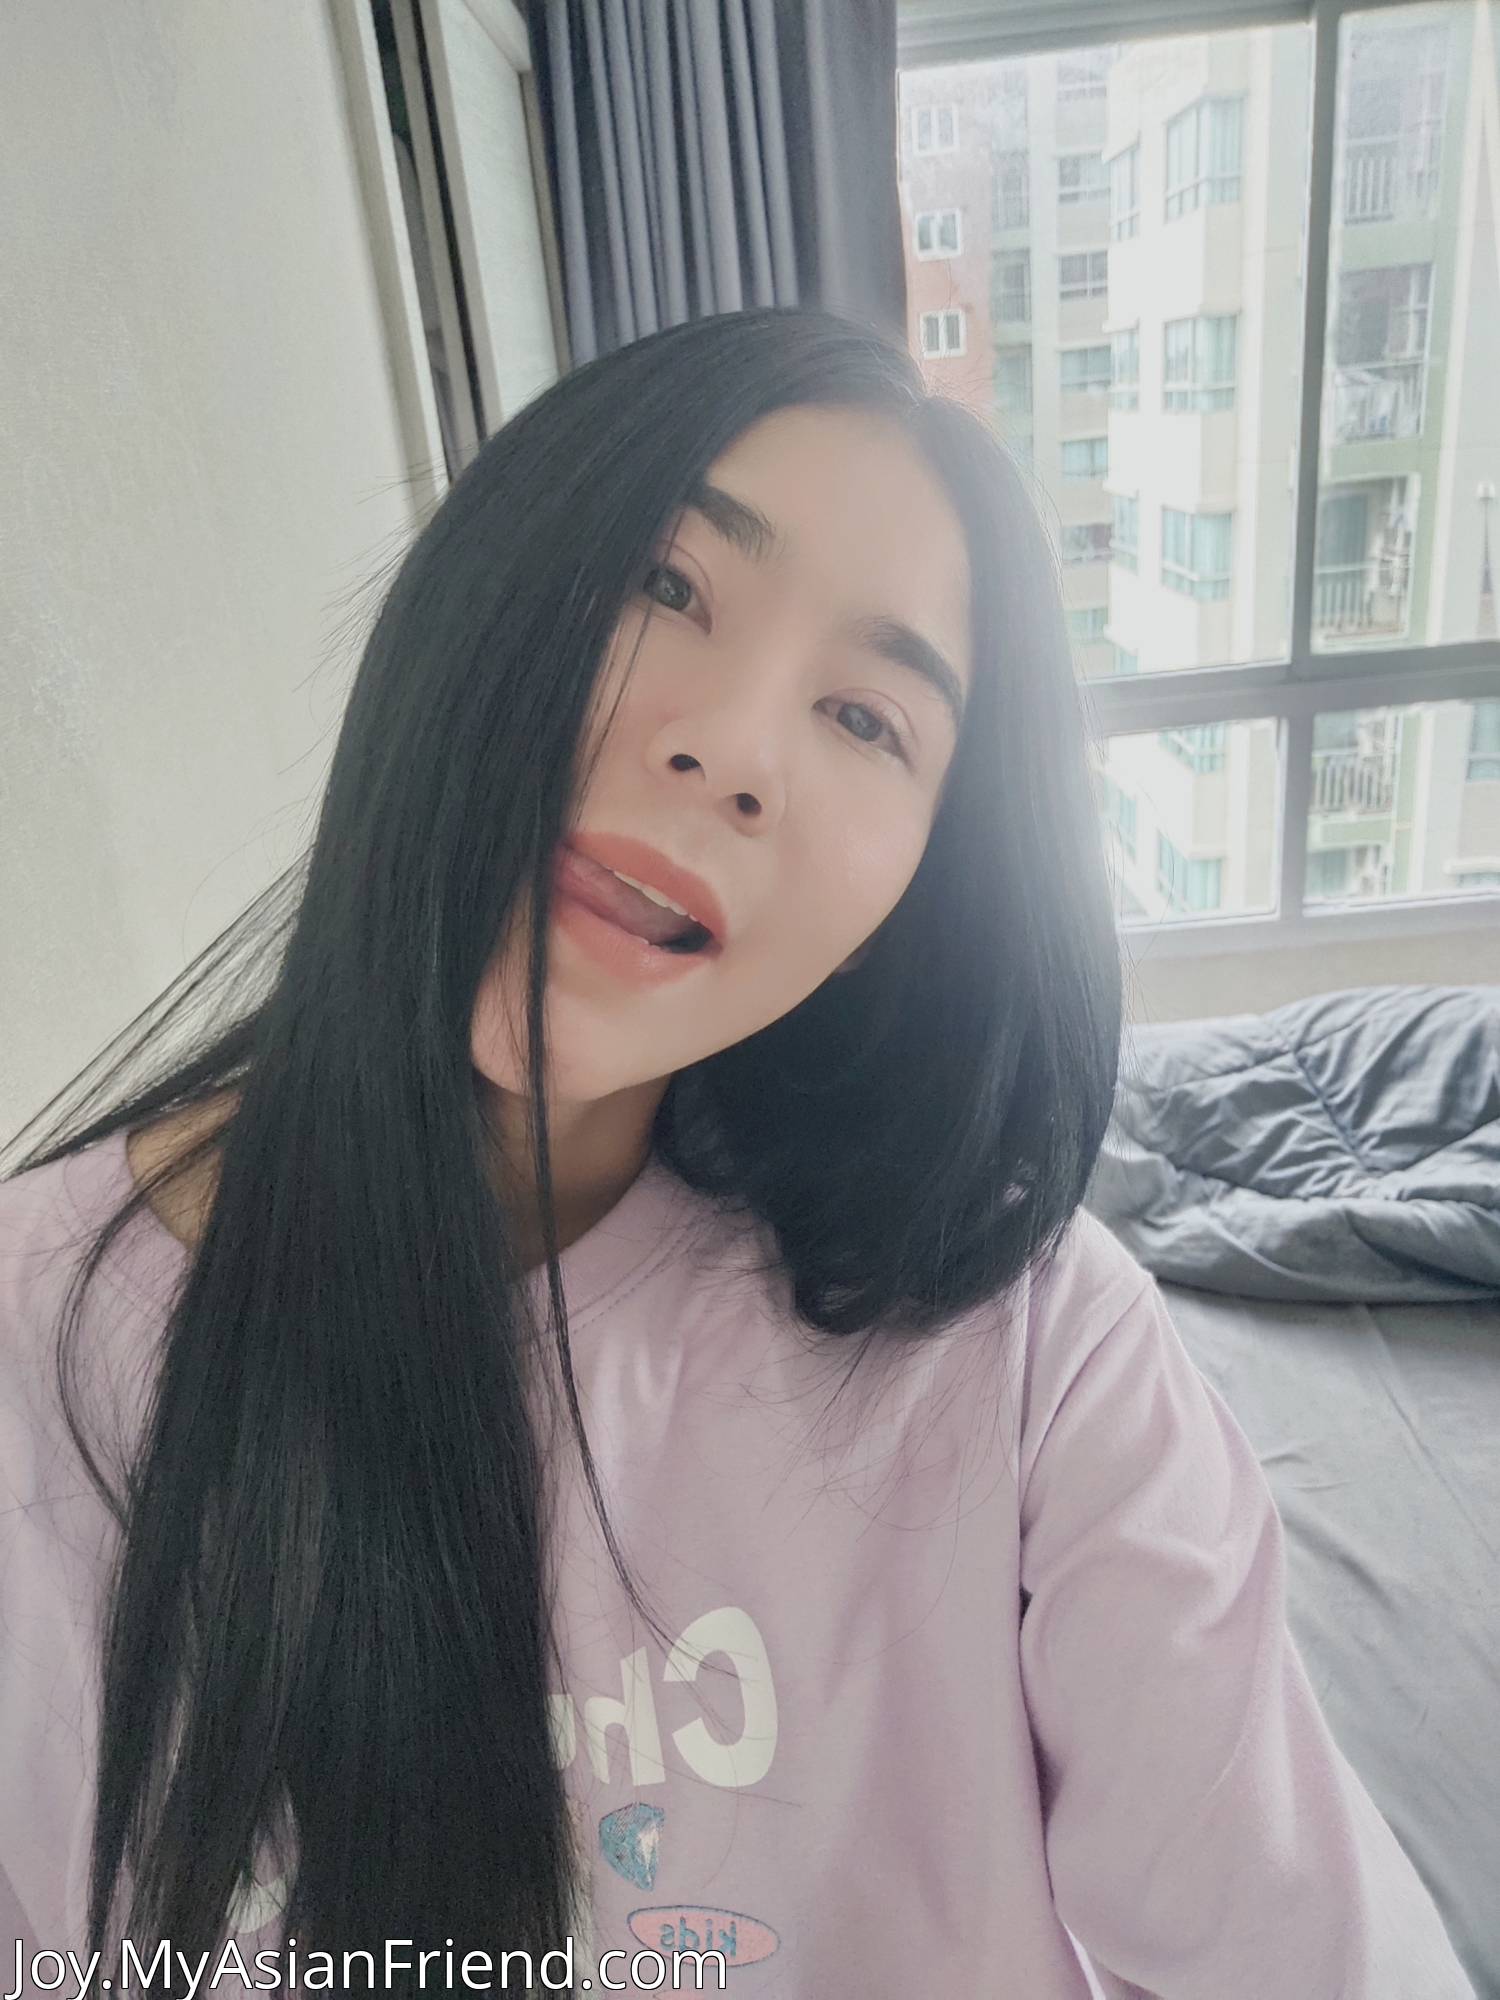 Joy's personal blog photo 1 added Friday the 2nd of September 2022